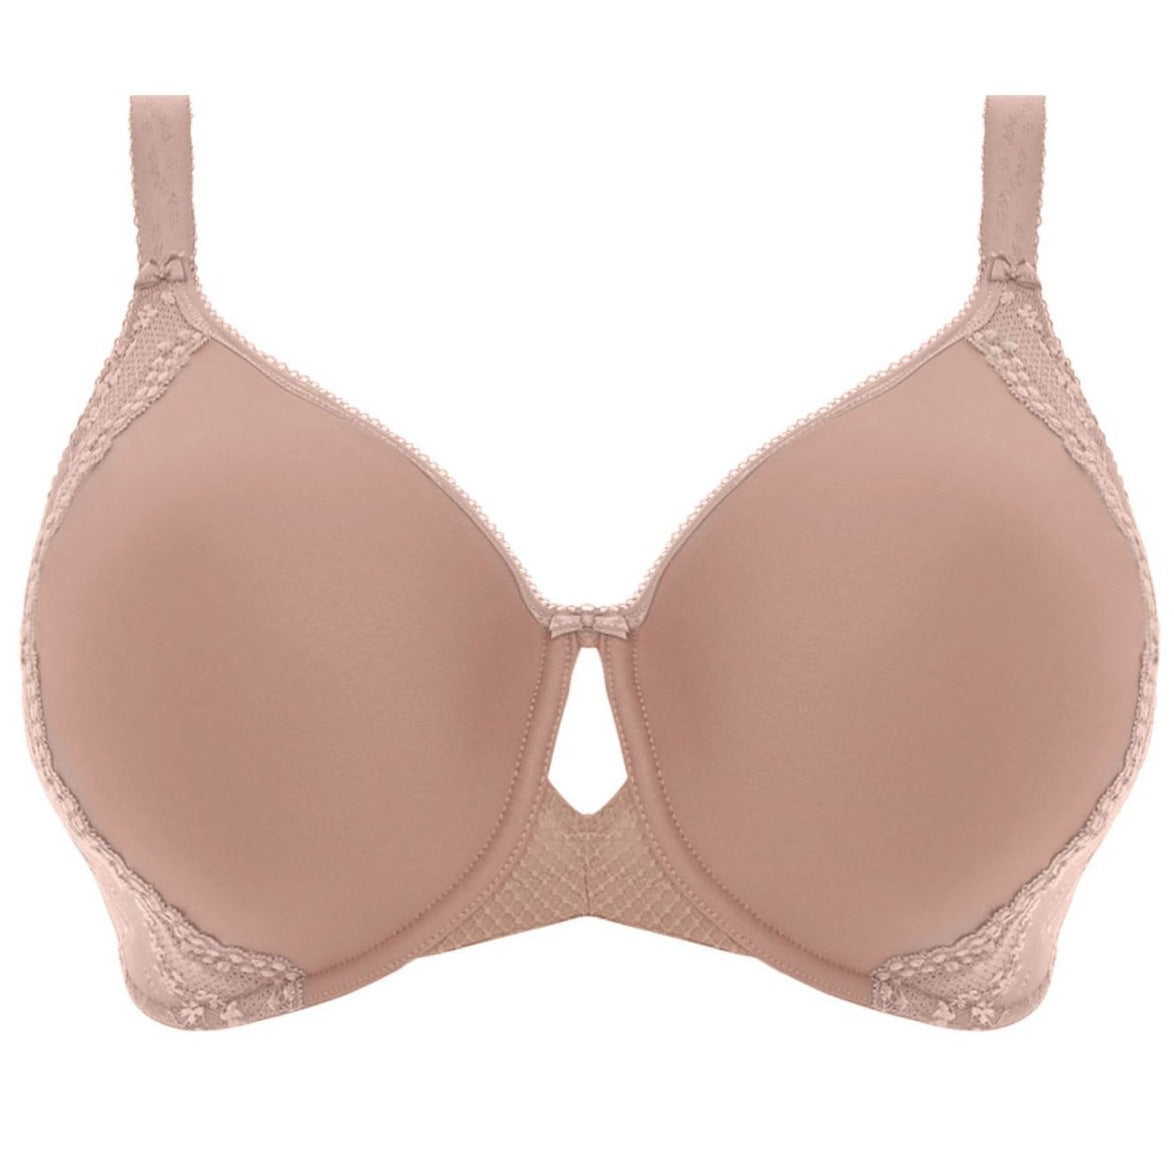 A well fitting bra for all from La Tee Da - Campbell River Mirror